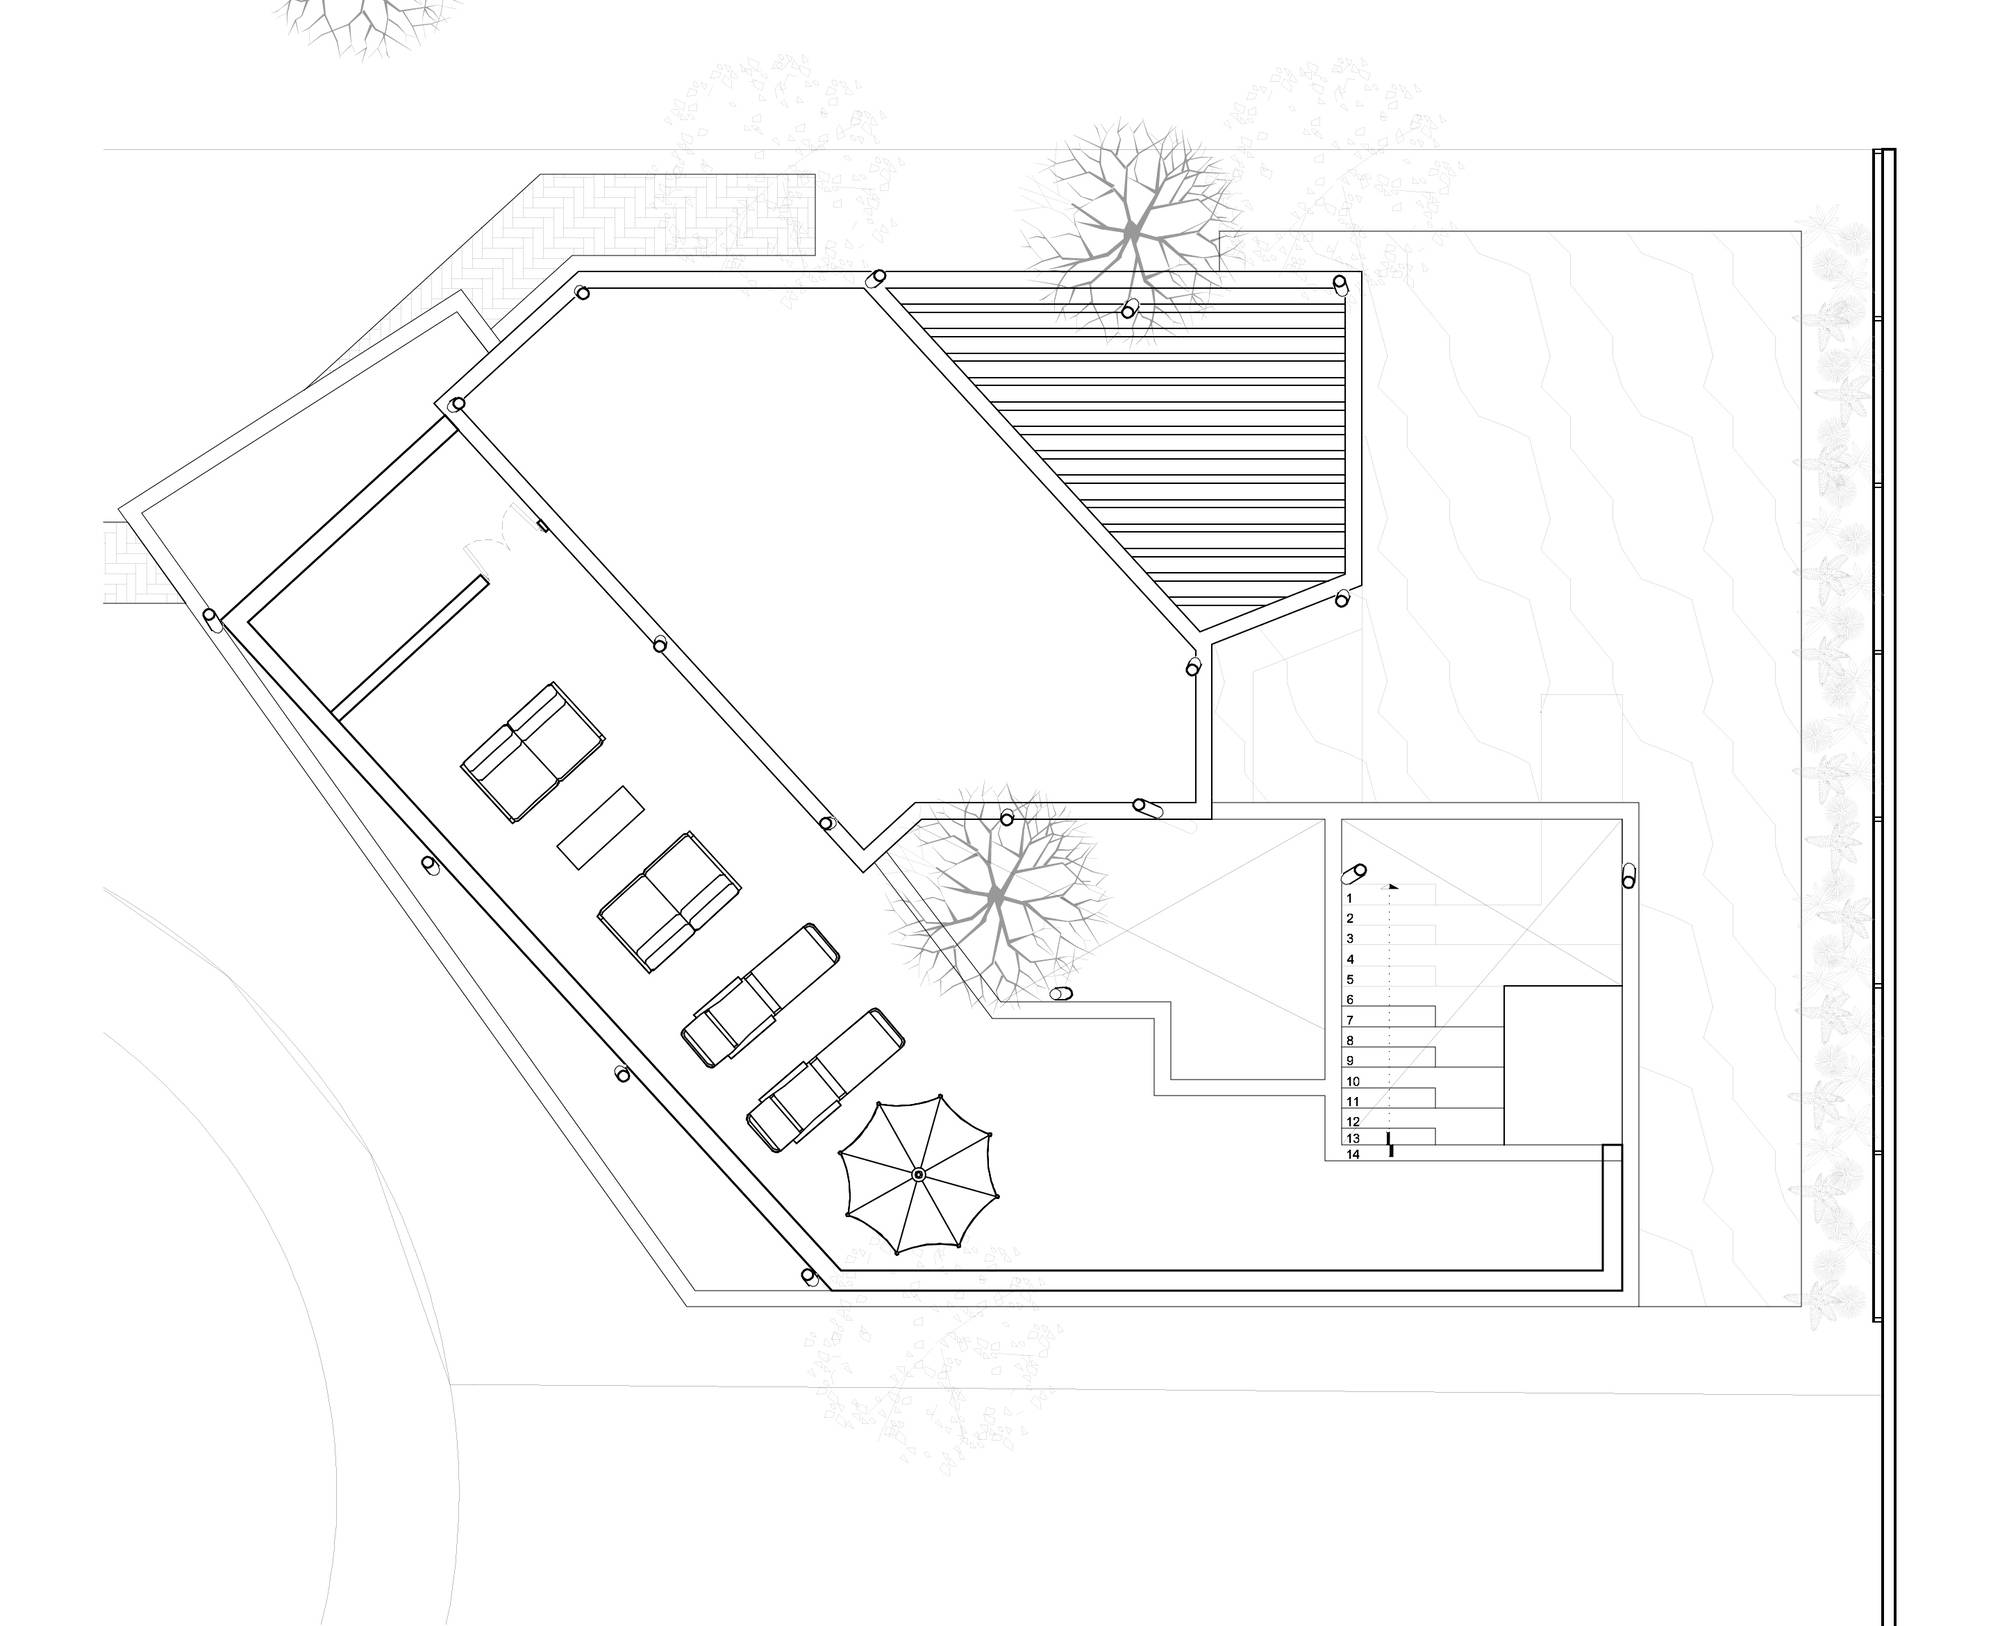 Upper-level-floor-plan-of-Barrenechea-House-Extension-designed-by-Cafeina-Design-in-Santa-Cruc-Bolivia-83258